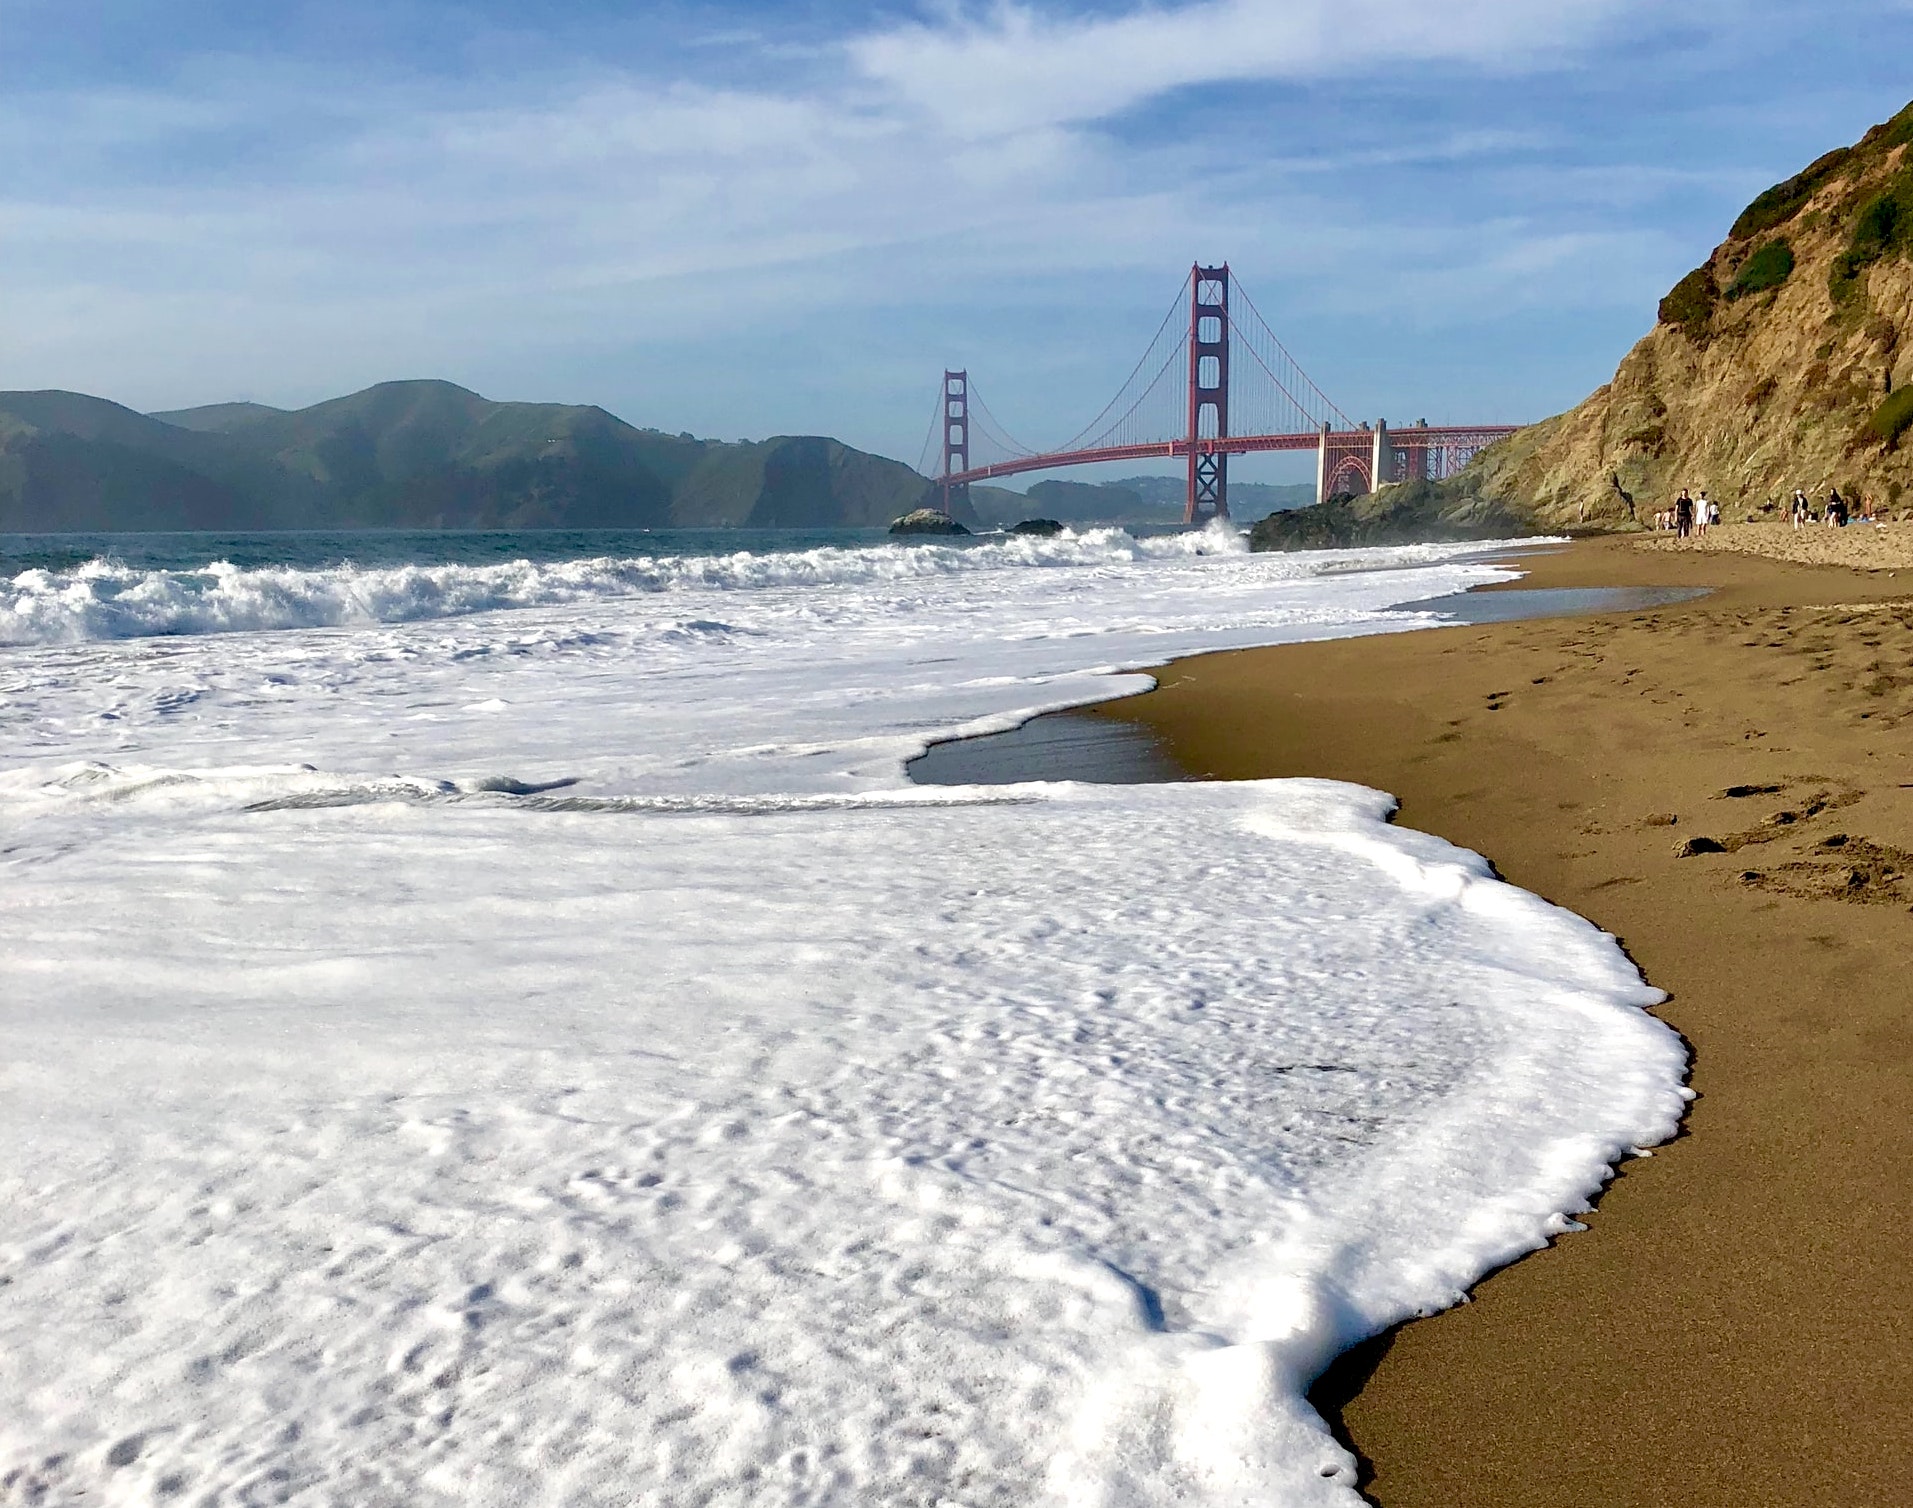 Baker Beach with waves in the foreground and Golden Gate Bridge in the distance as photographed from the Presidio of SF